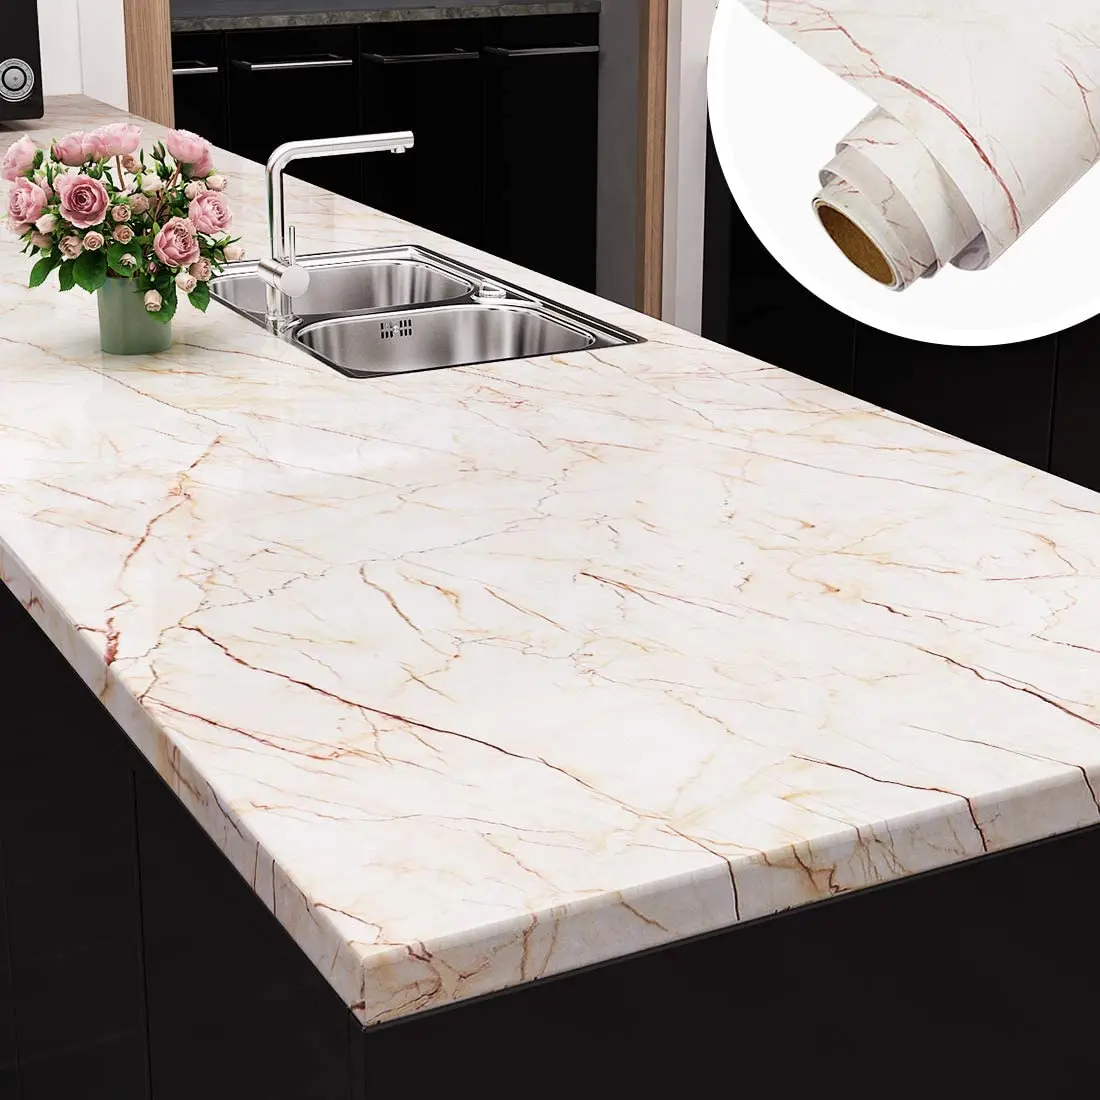 

Waterproof Oil Proof Marble Self Adhesive Wallpapers Vinyl Wall Stickers For Bathroom Kitchen Cupboard Home Decor Sticky Papers